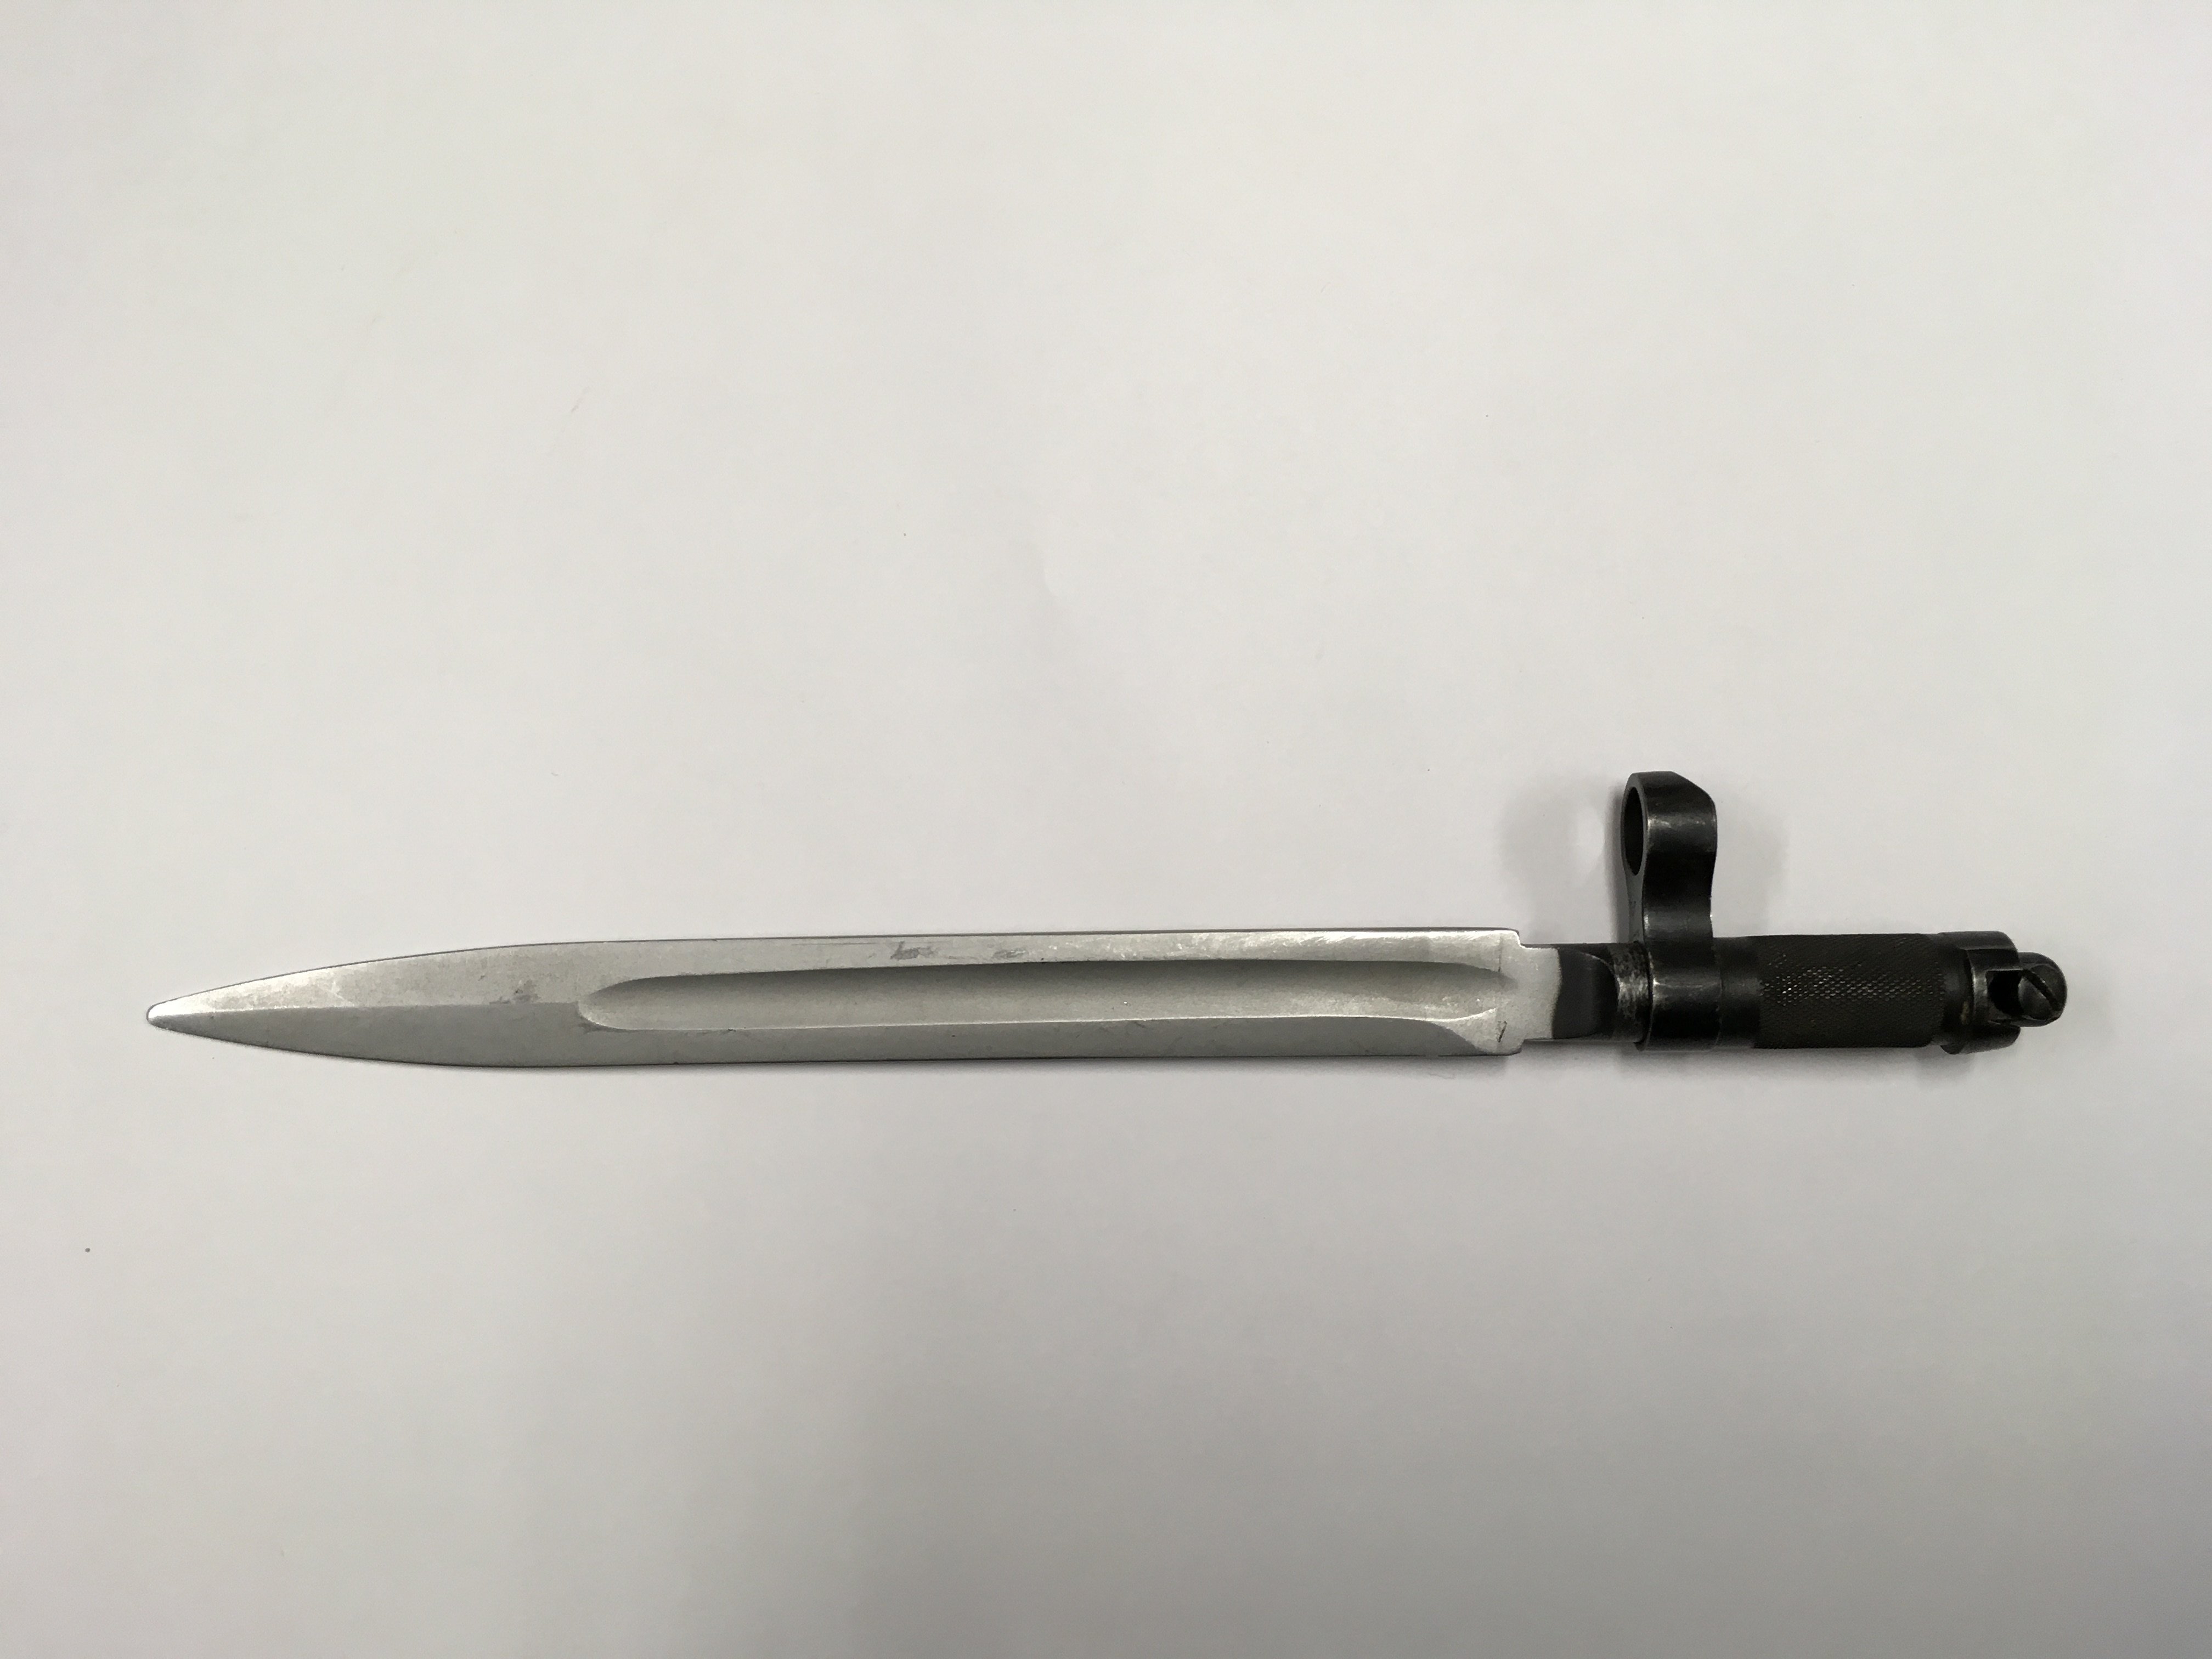 A 1960s Chinese SKS spike bayonet for use by parat